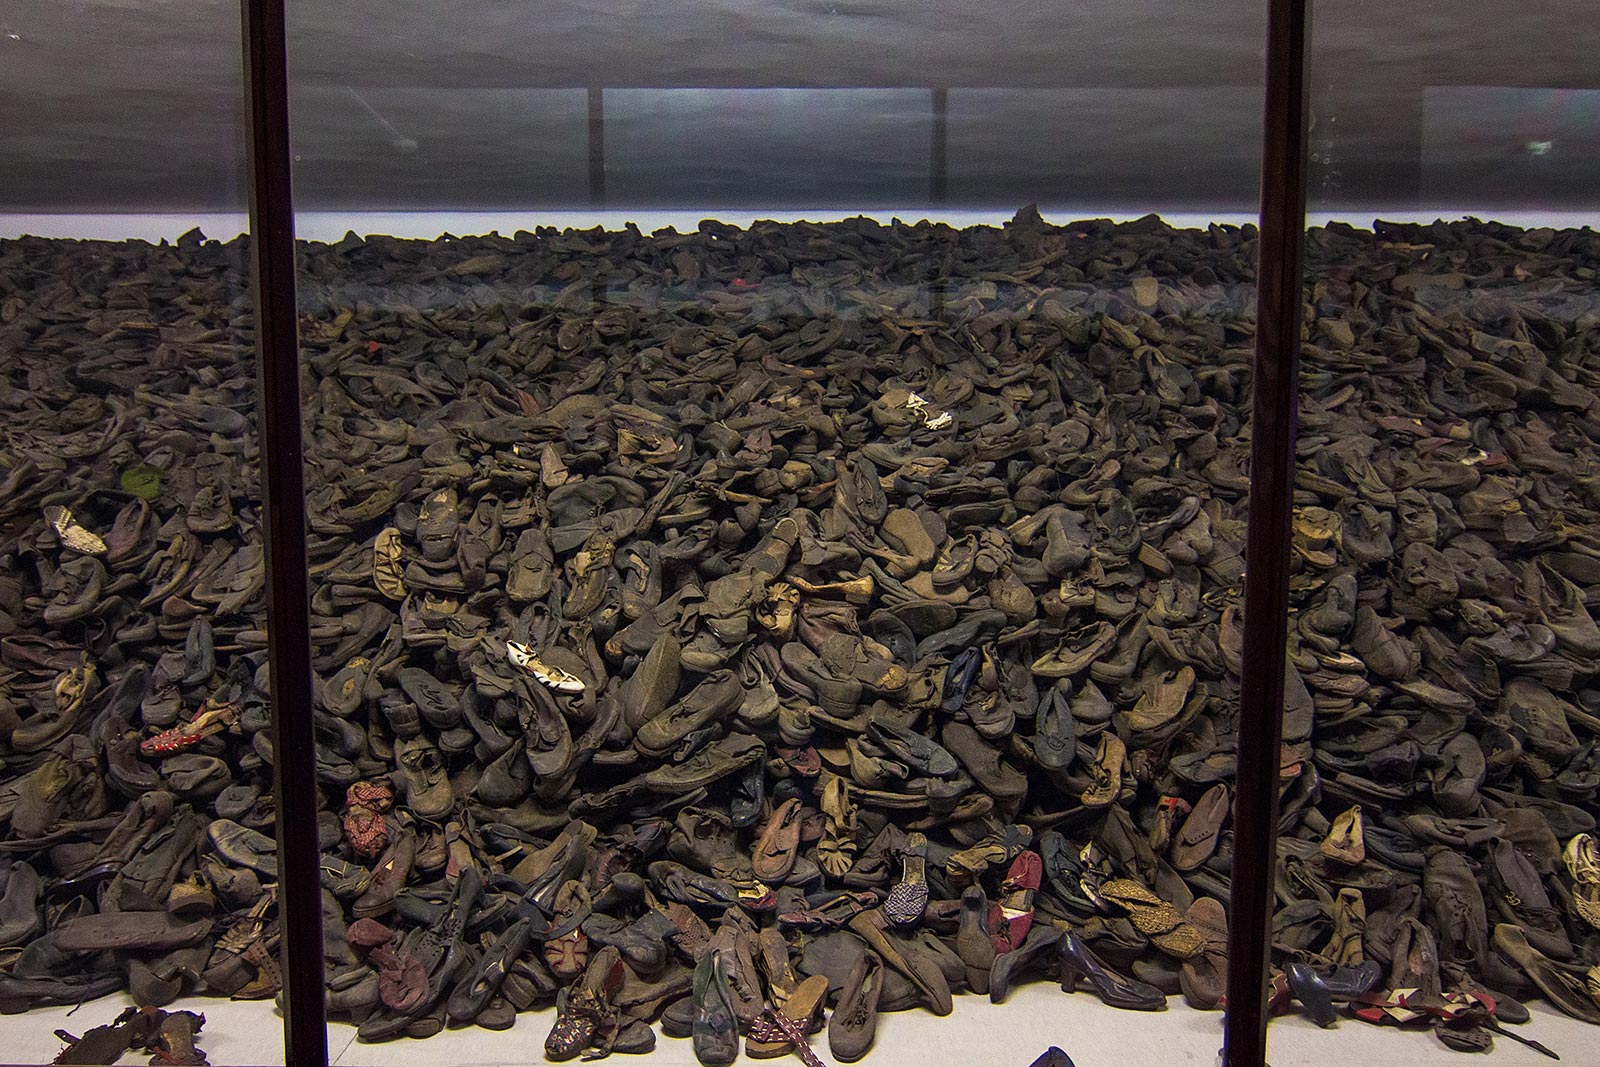 Shoes of executed prisoners in Auschwitz, Oświęcim, Poland. Mixed feelings in Auschwitz